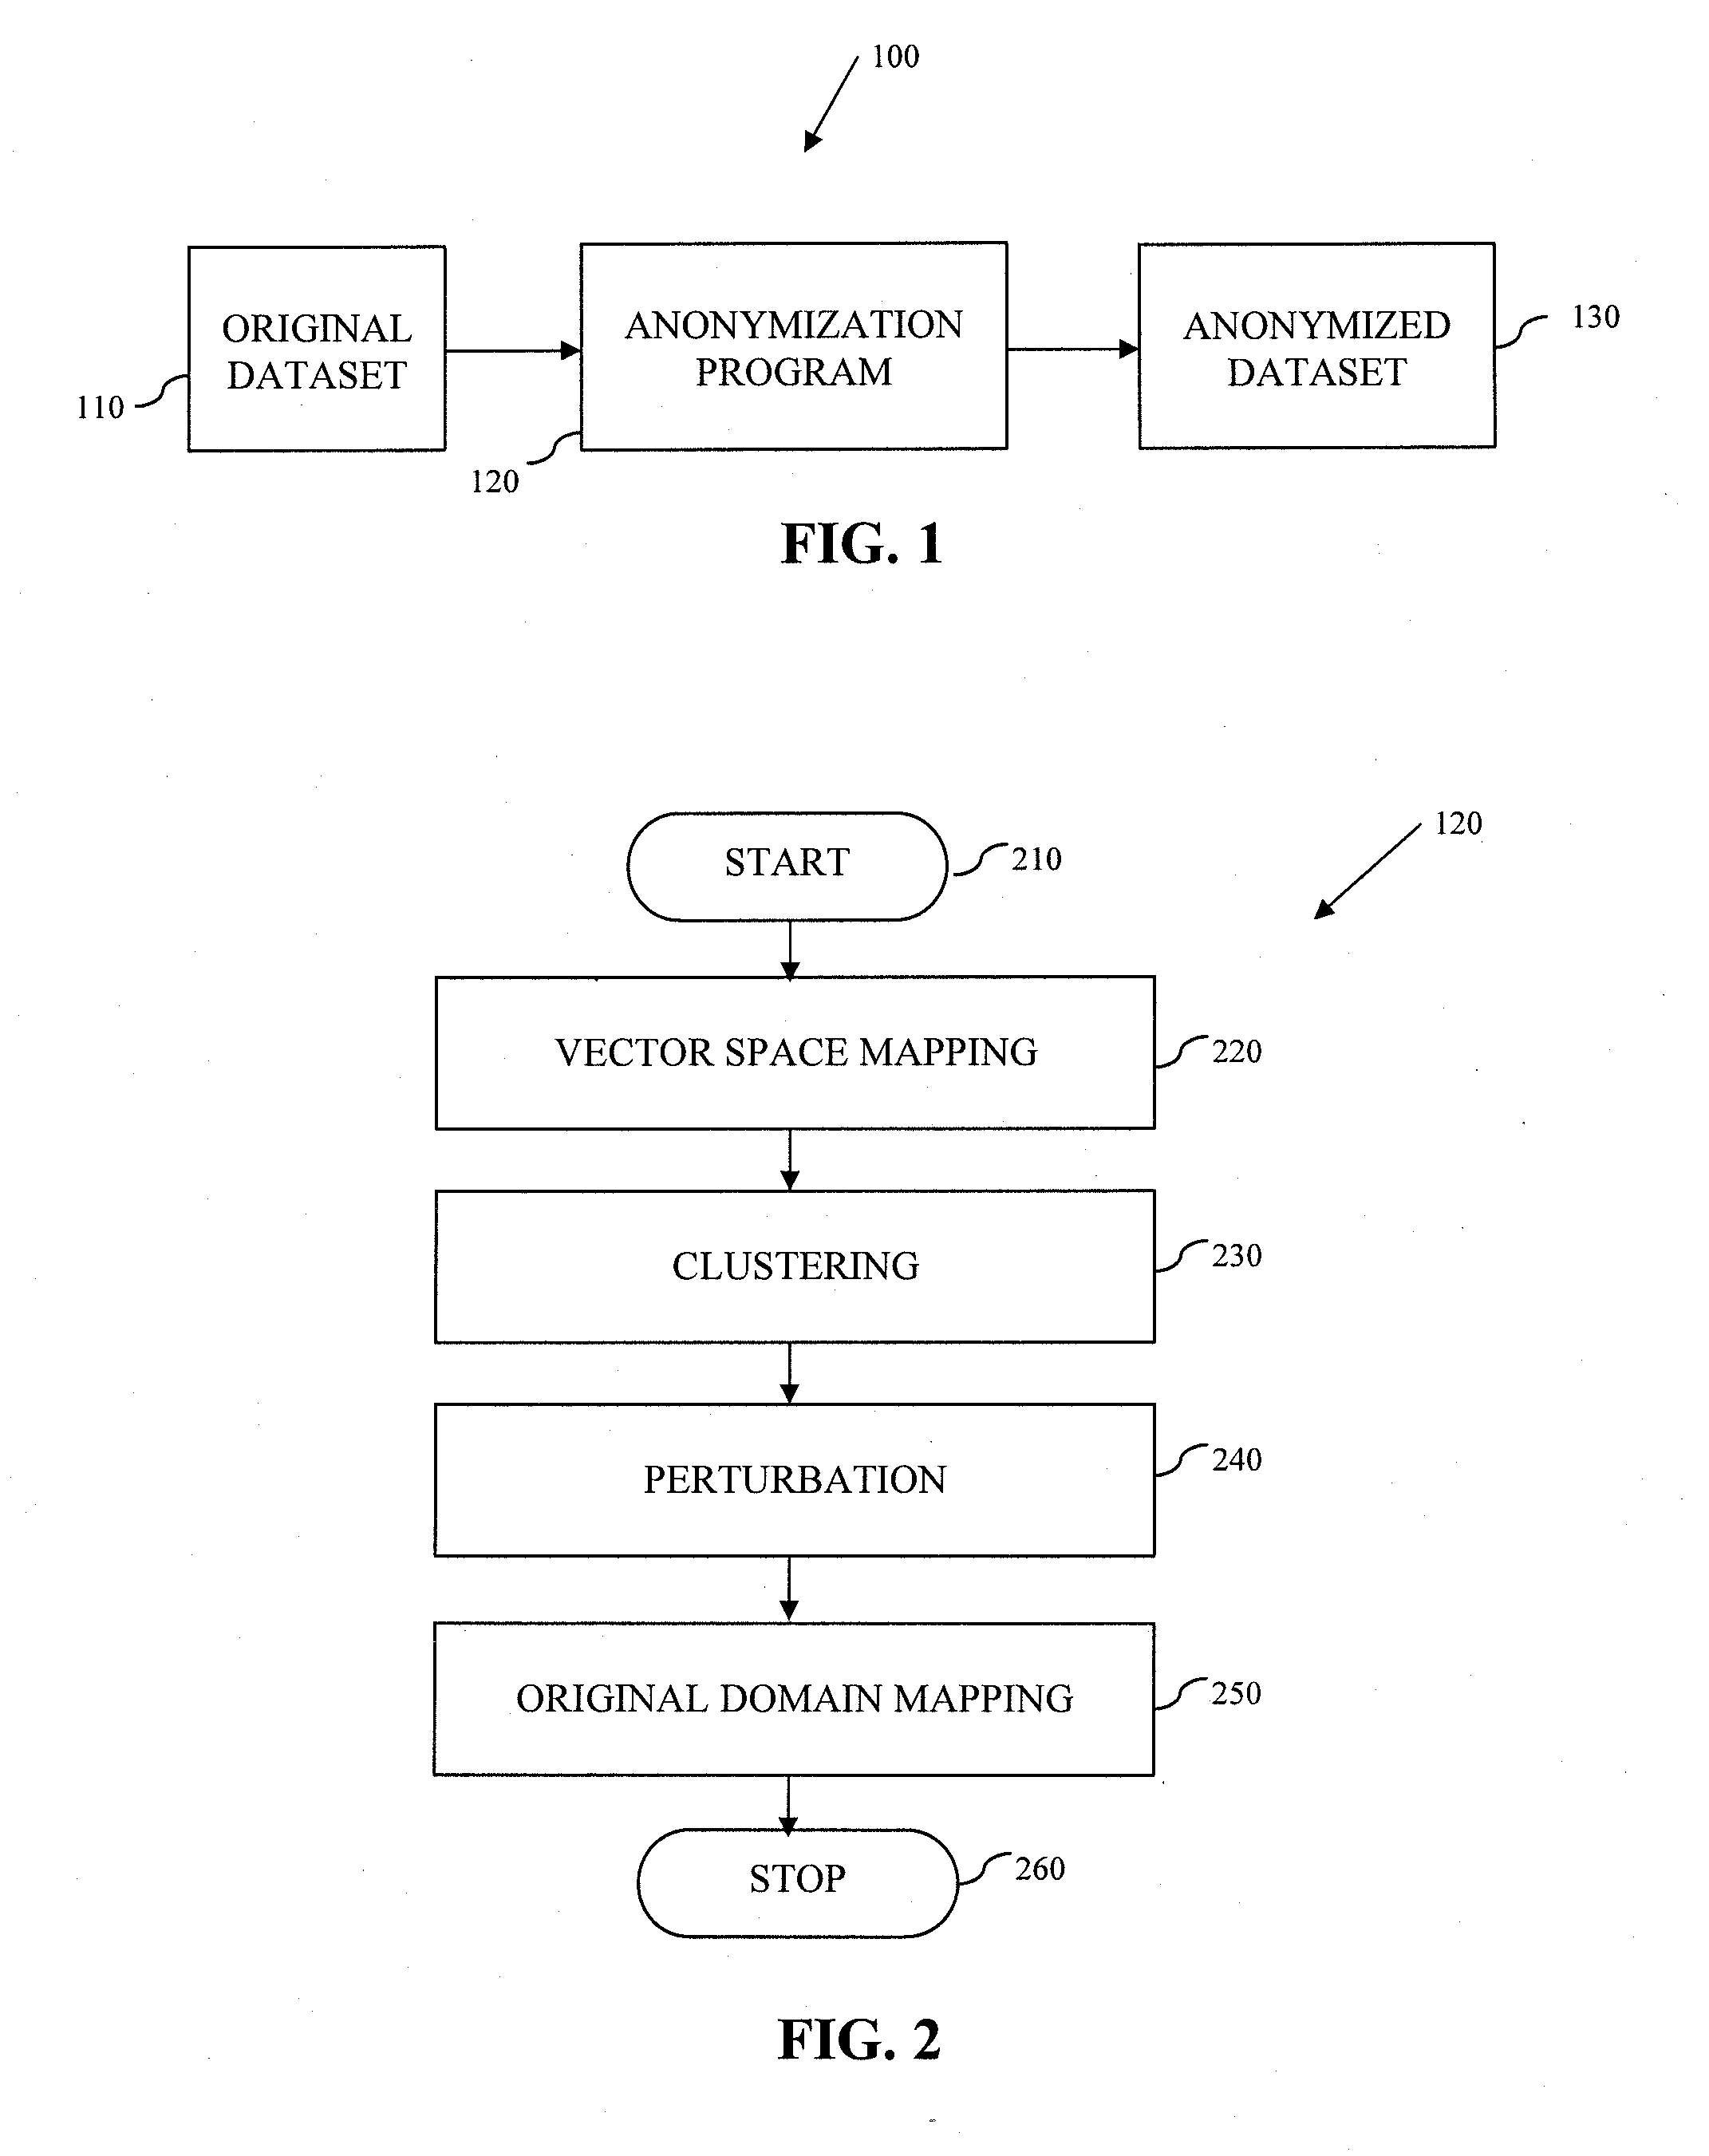 System and Method for Data Anonymization Using Hierarchical Data Clustering and Perturbation